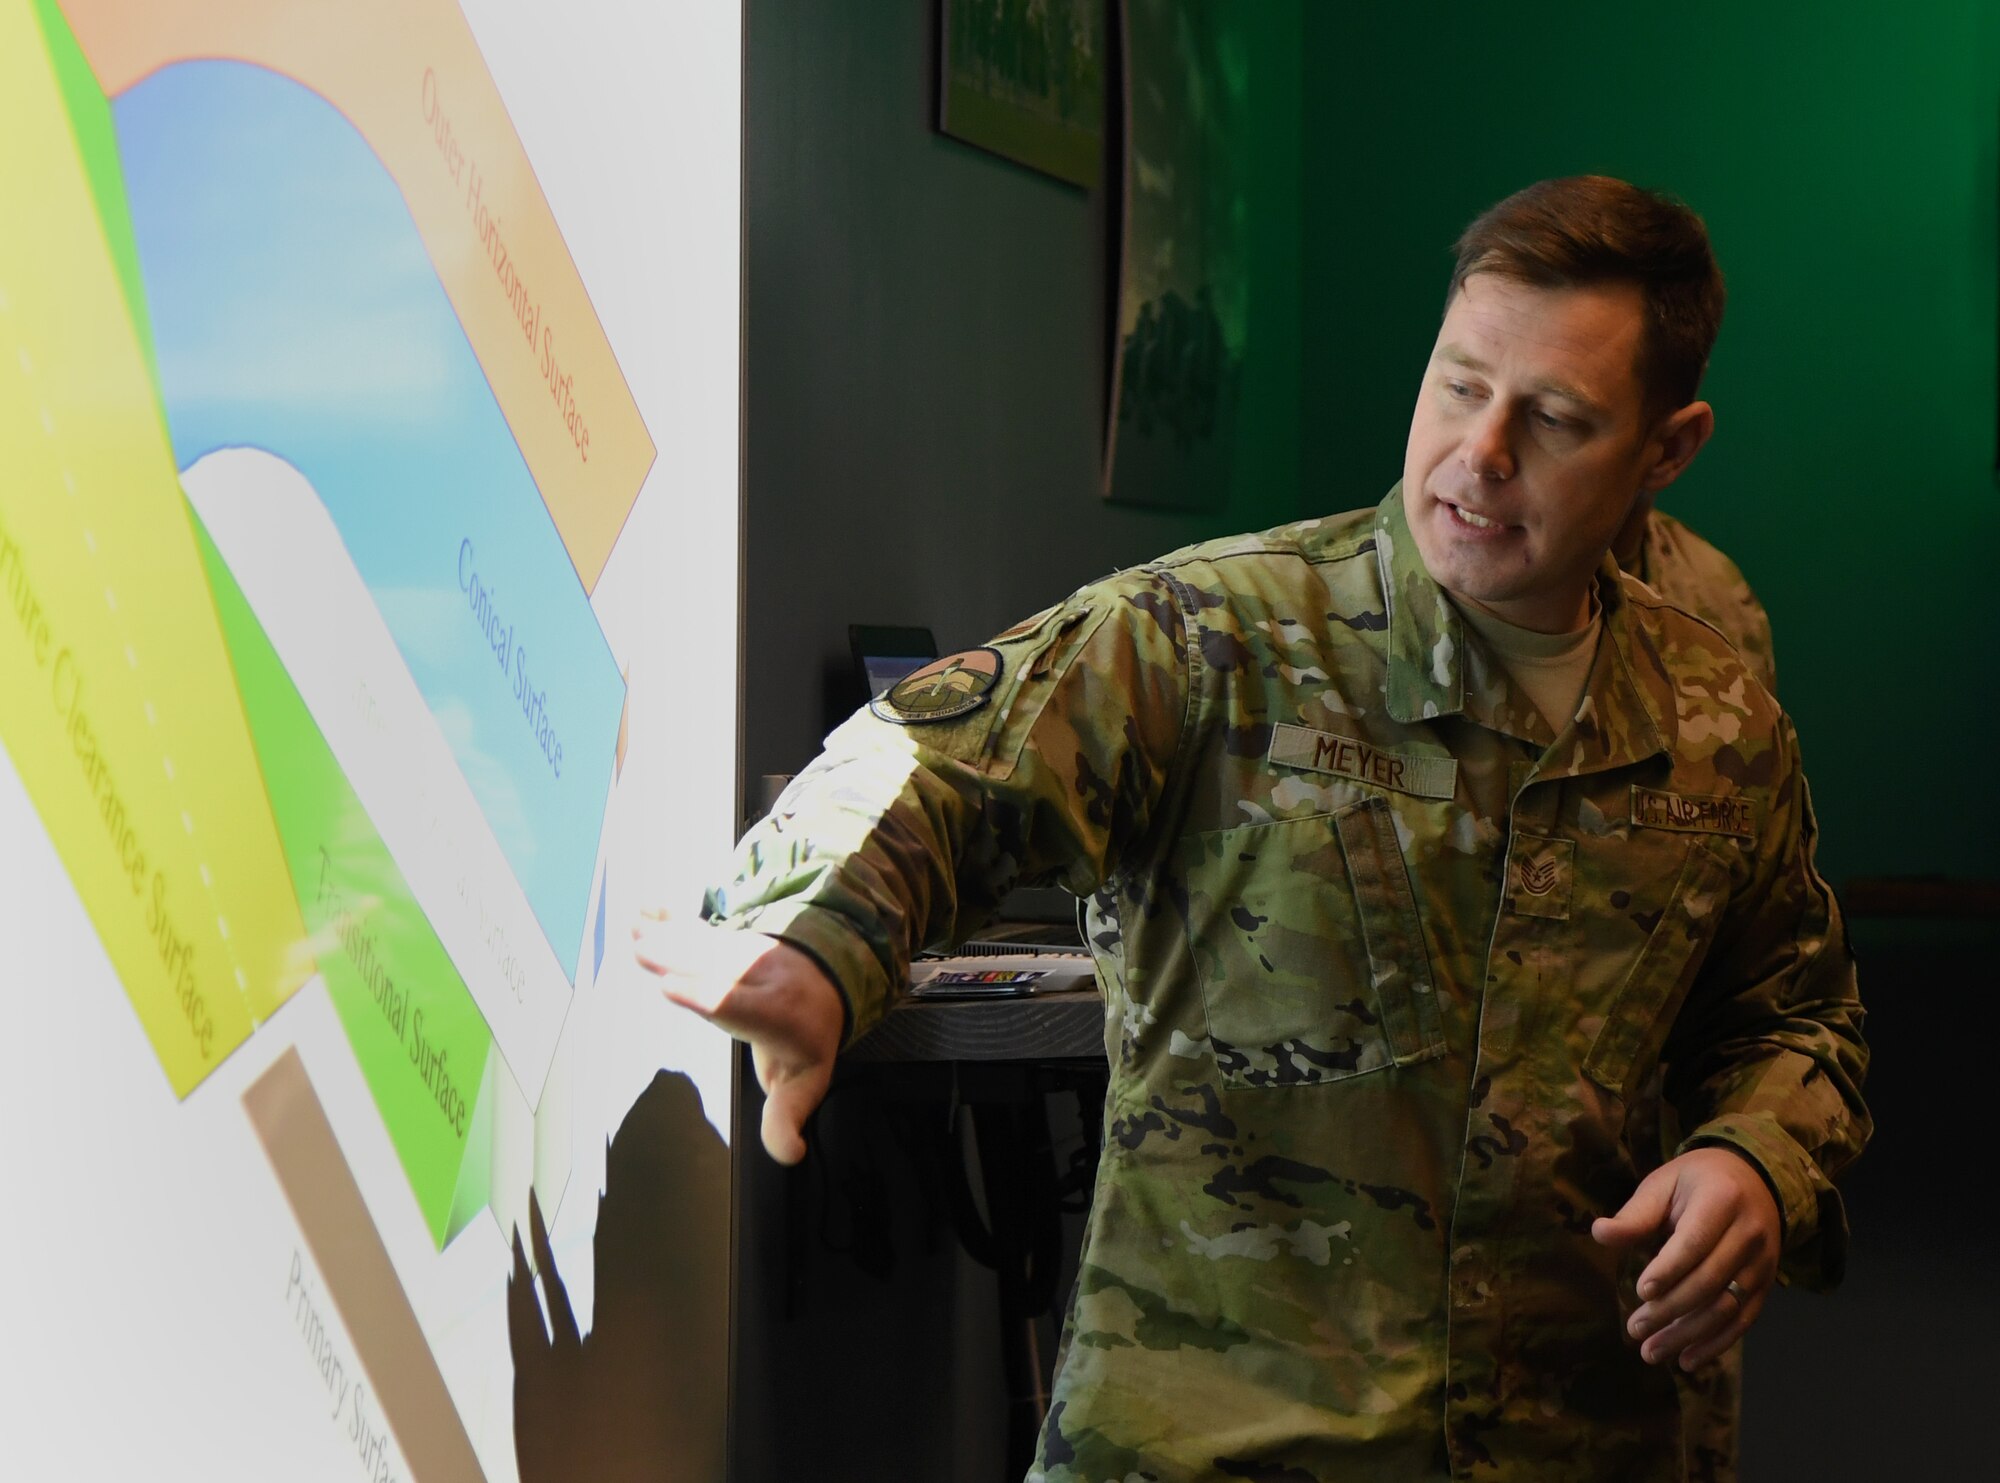 U.S. Air Force Tech. Sgt. Andrew Meyer, 334th Training Squadron instructor, briefs about imaginary surfaces during the airspace sustainability tour inside Cody Hall at Keesler Air Force Base, Mississippi, Jan. 23, 2020. Keesler hosted the community engagement for civic leaders to discuss Keesler's flying mission requirements in order to create processes which inform key decision makers regarding local development, and to ensure compatible economic growth for the surrounding communities. (U.S. Air Force photo by Kemberly Groue)